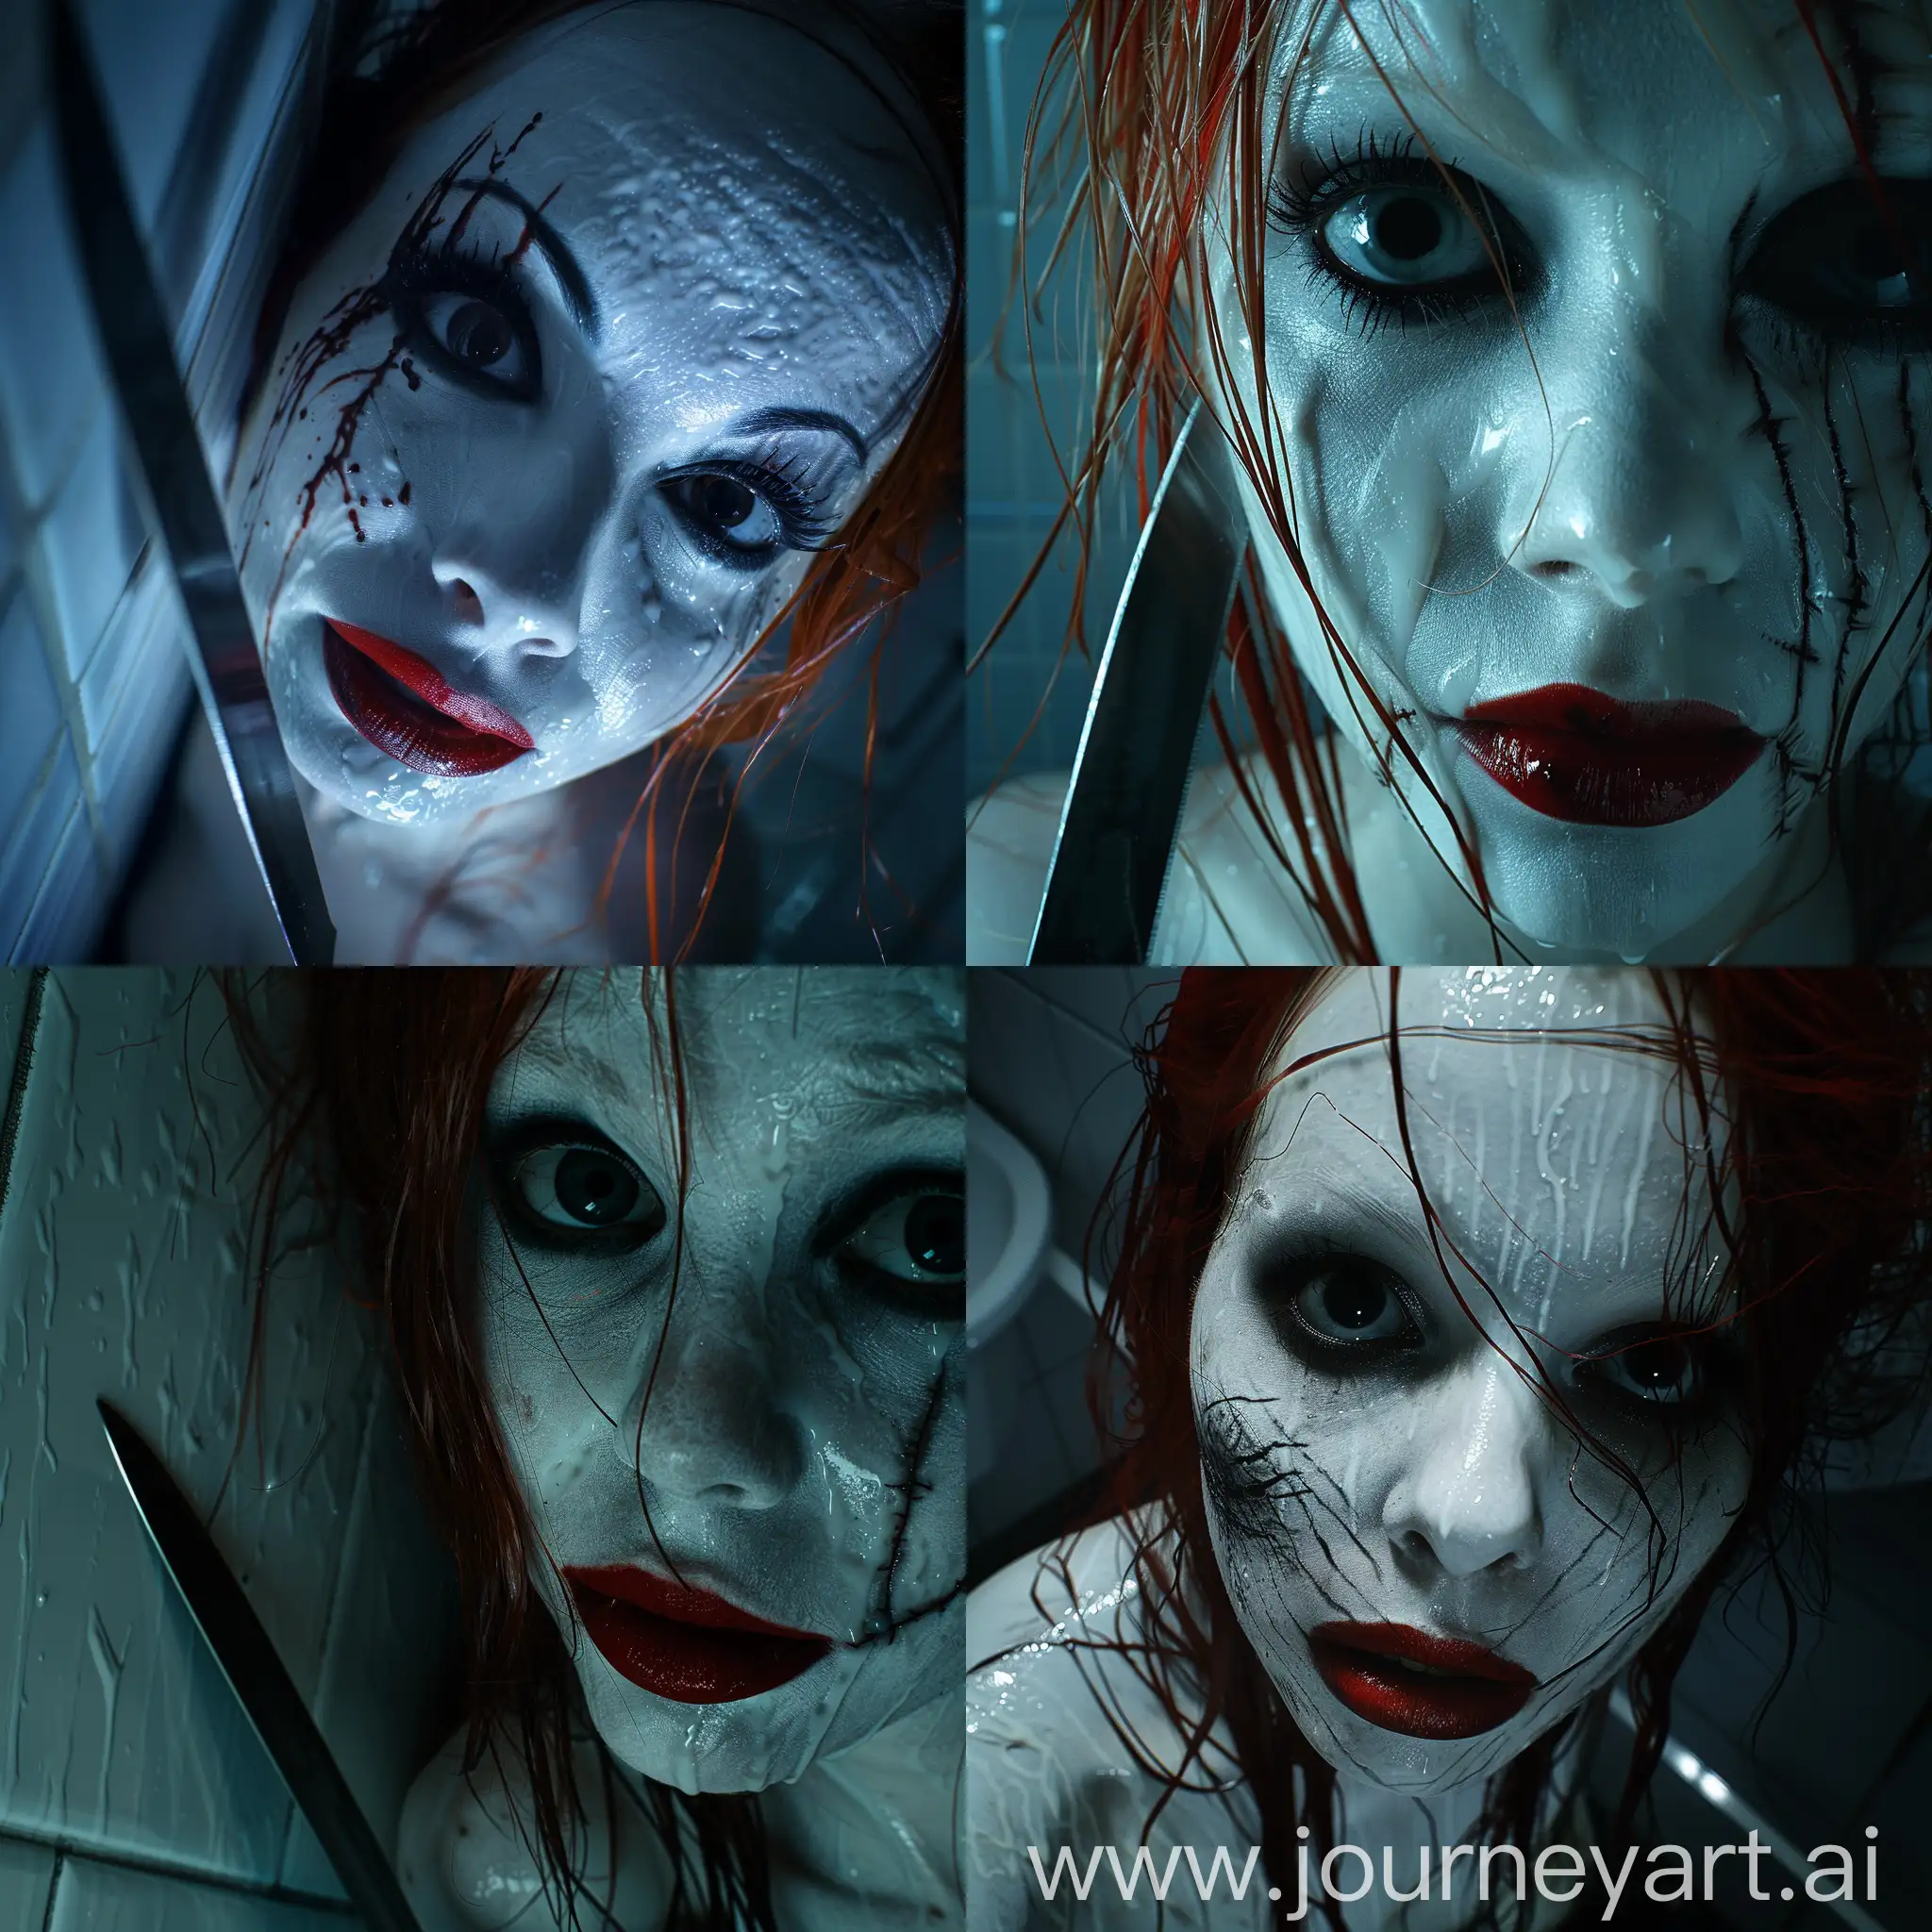 Woman with milky white skin, big black eyes, red lipstick, redhair, her hair is wet, has straches on her face, knife, at dark hotel bathroom, scary movie scene, cinematic lighting, realistic image